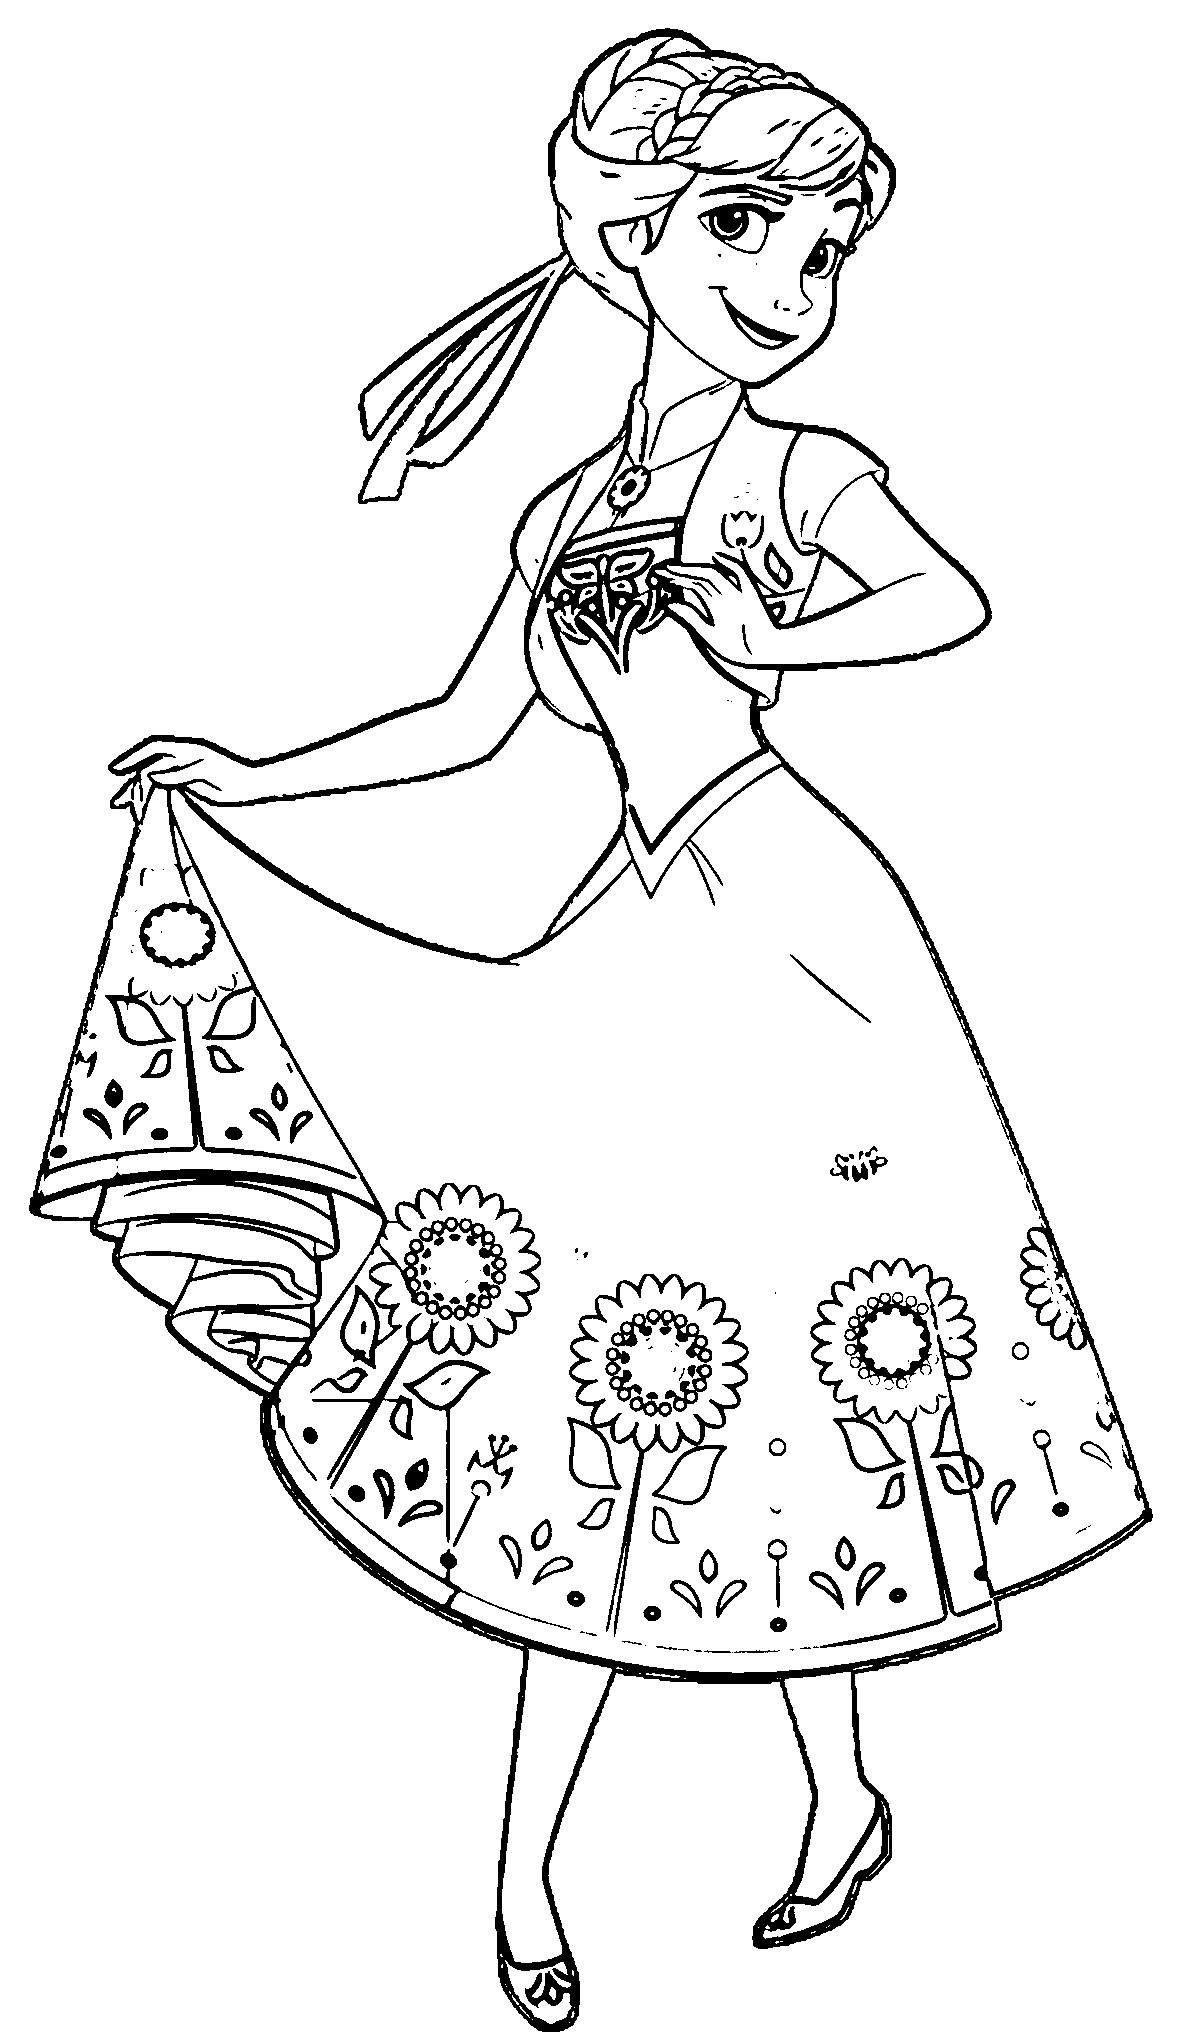 Elsa Coloring Pages Free at GetColorings.com | Free ...